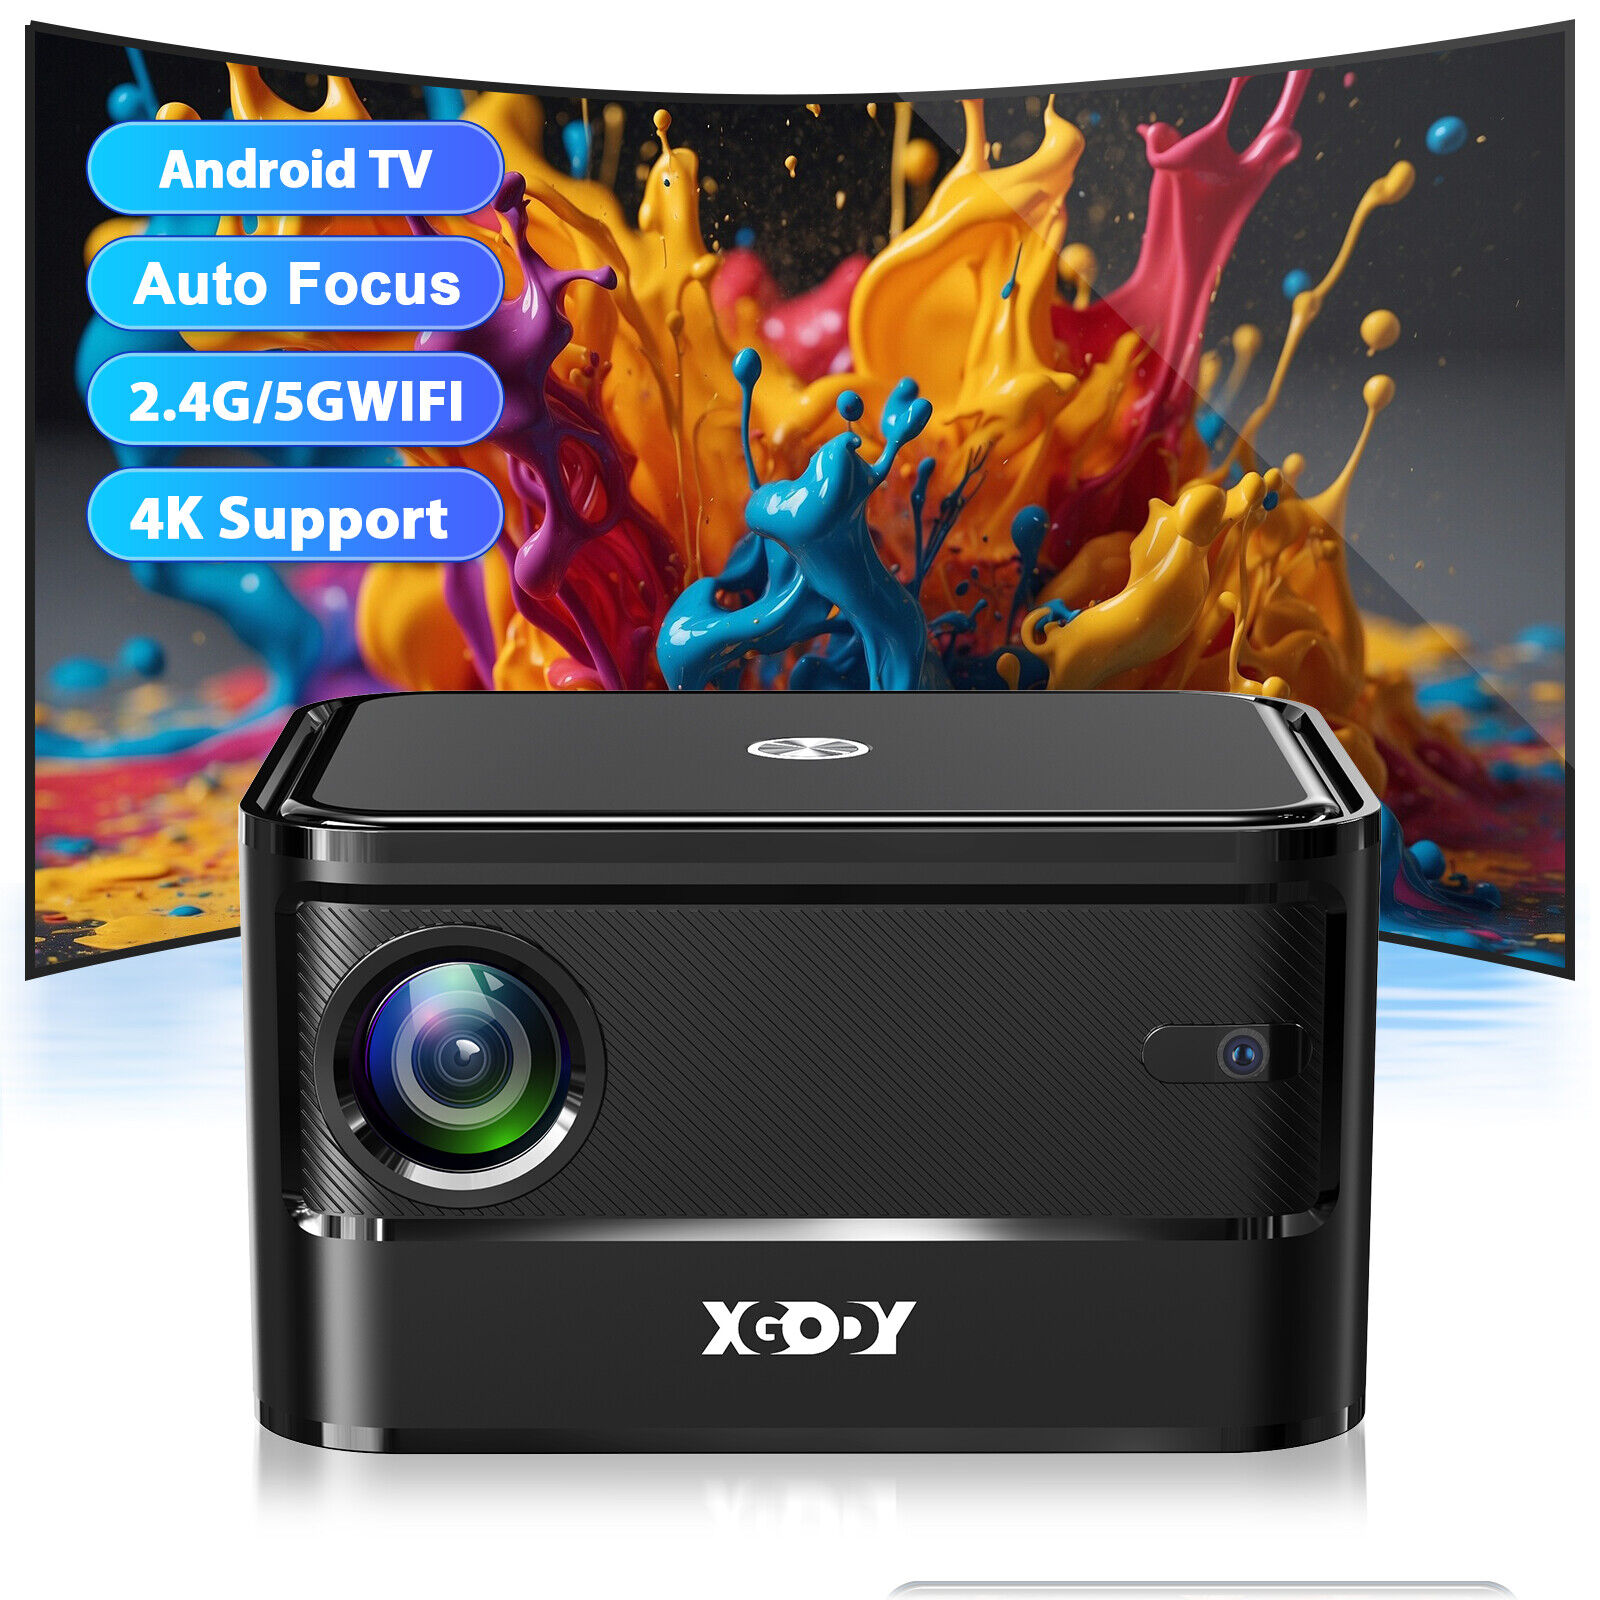 4K XGODY Projector 5G WiFi AutoFocus HD Android LED Home Theater Cinema Video US